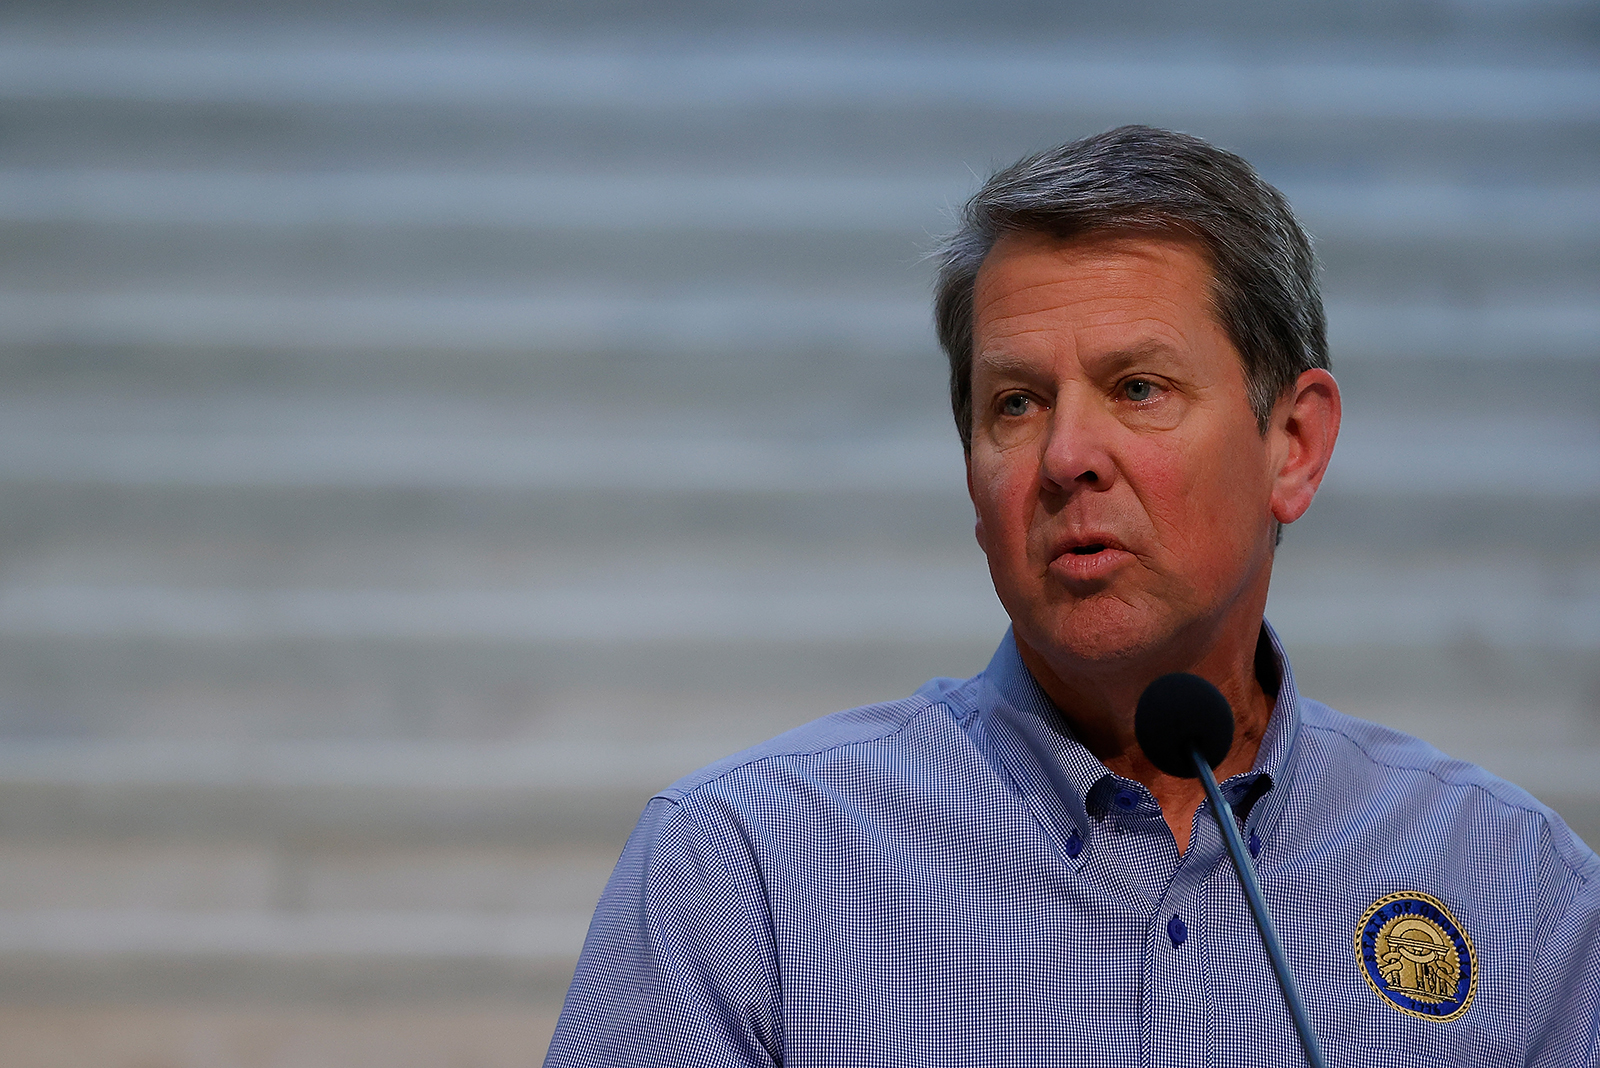 Georgia Gov. Brian Kemp speaks to the media during a press conference at the Georgia State Capitol on April 27, in Atlanta.